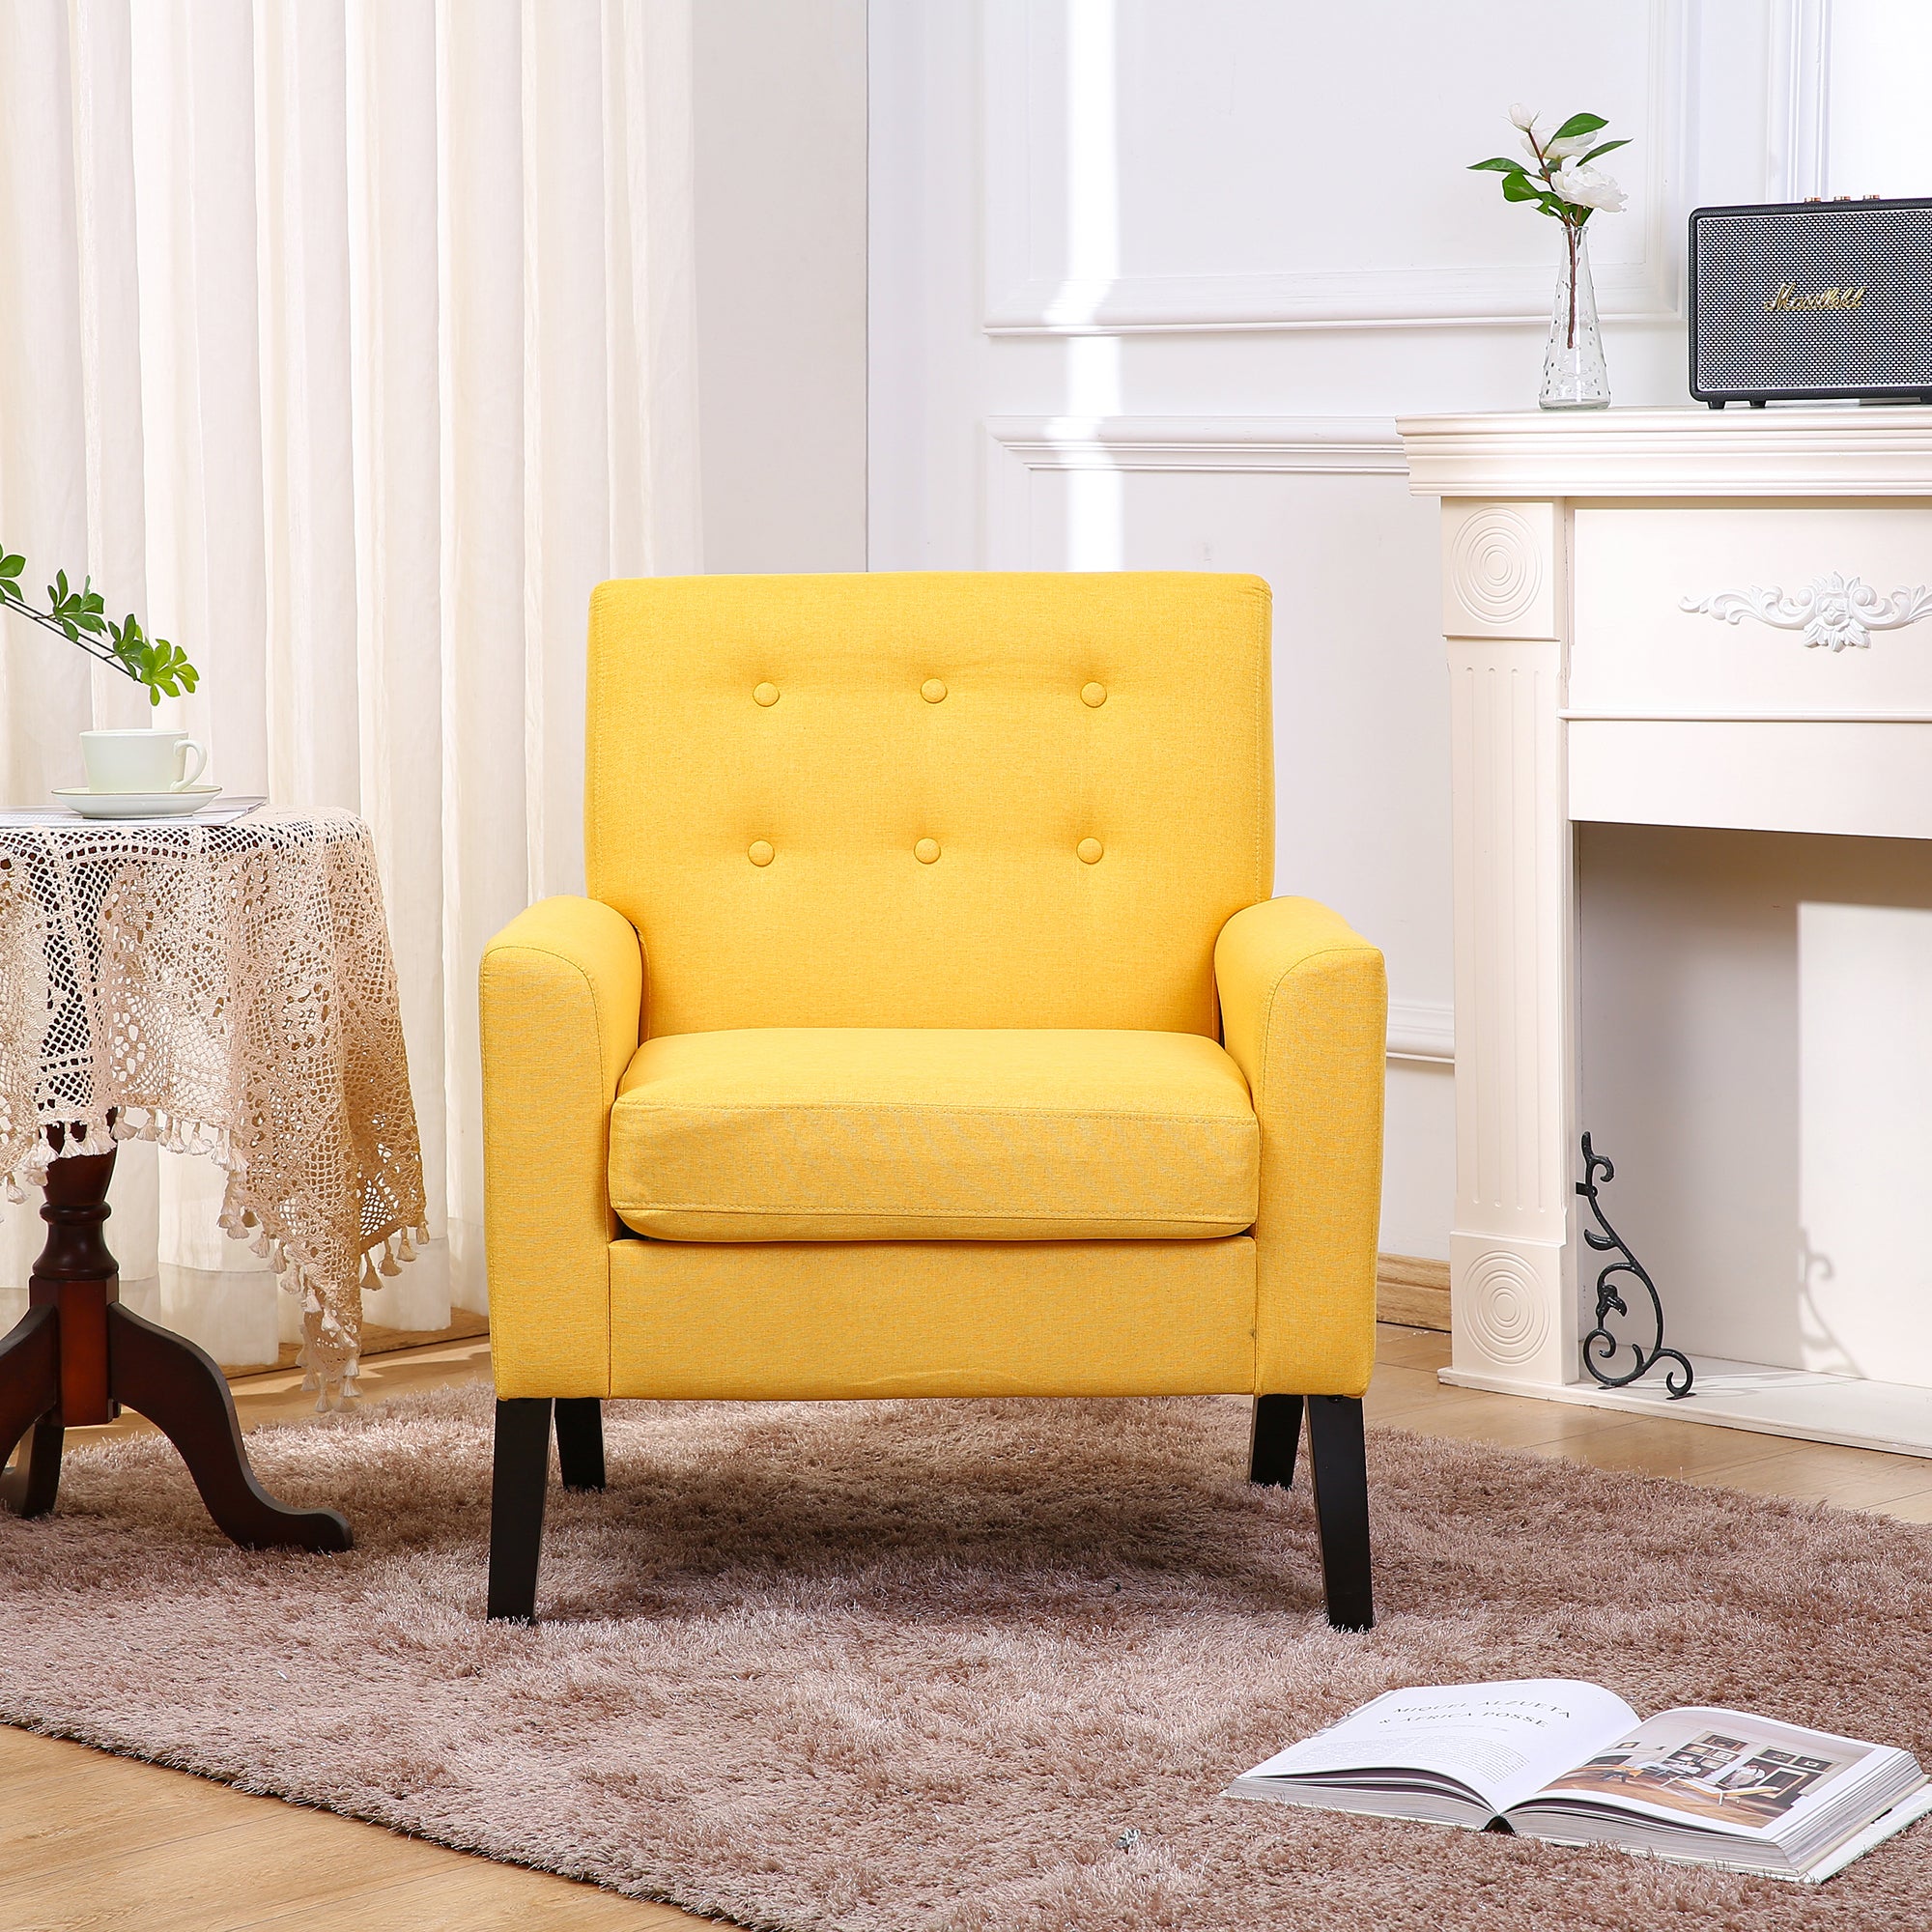 Downloads: 20 Fabric Accent Chair for Living Room yellow-brown-primary living space-american